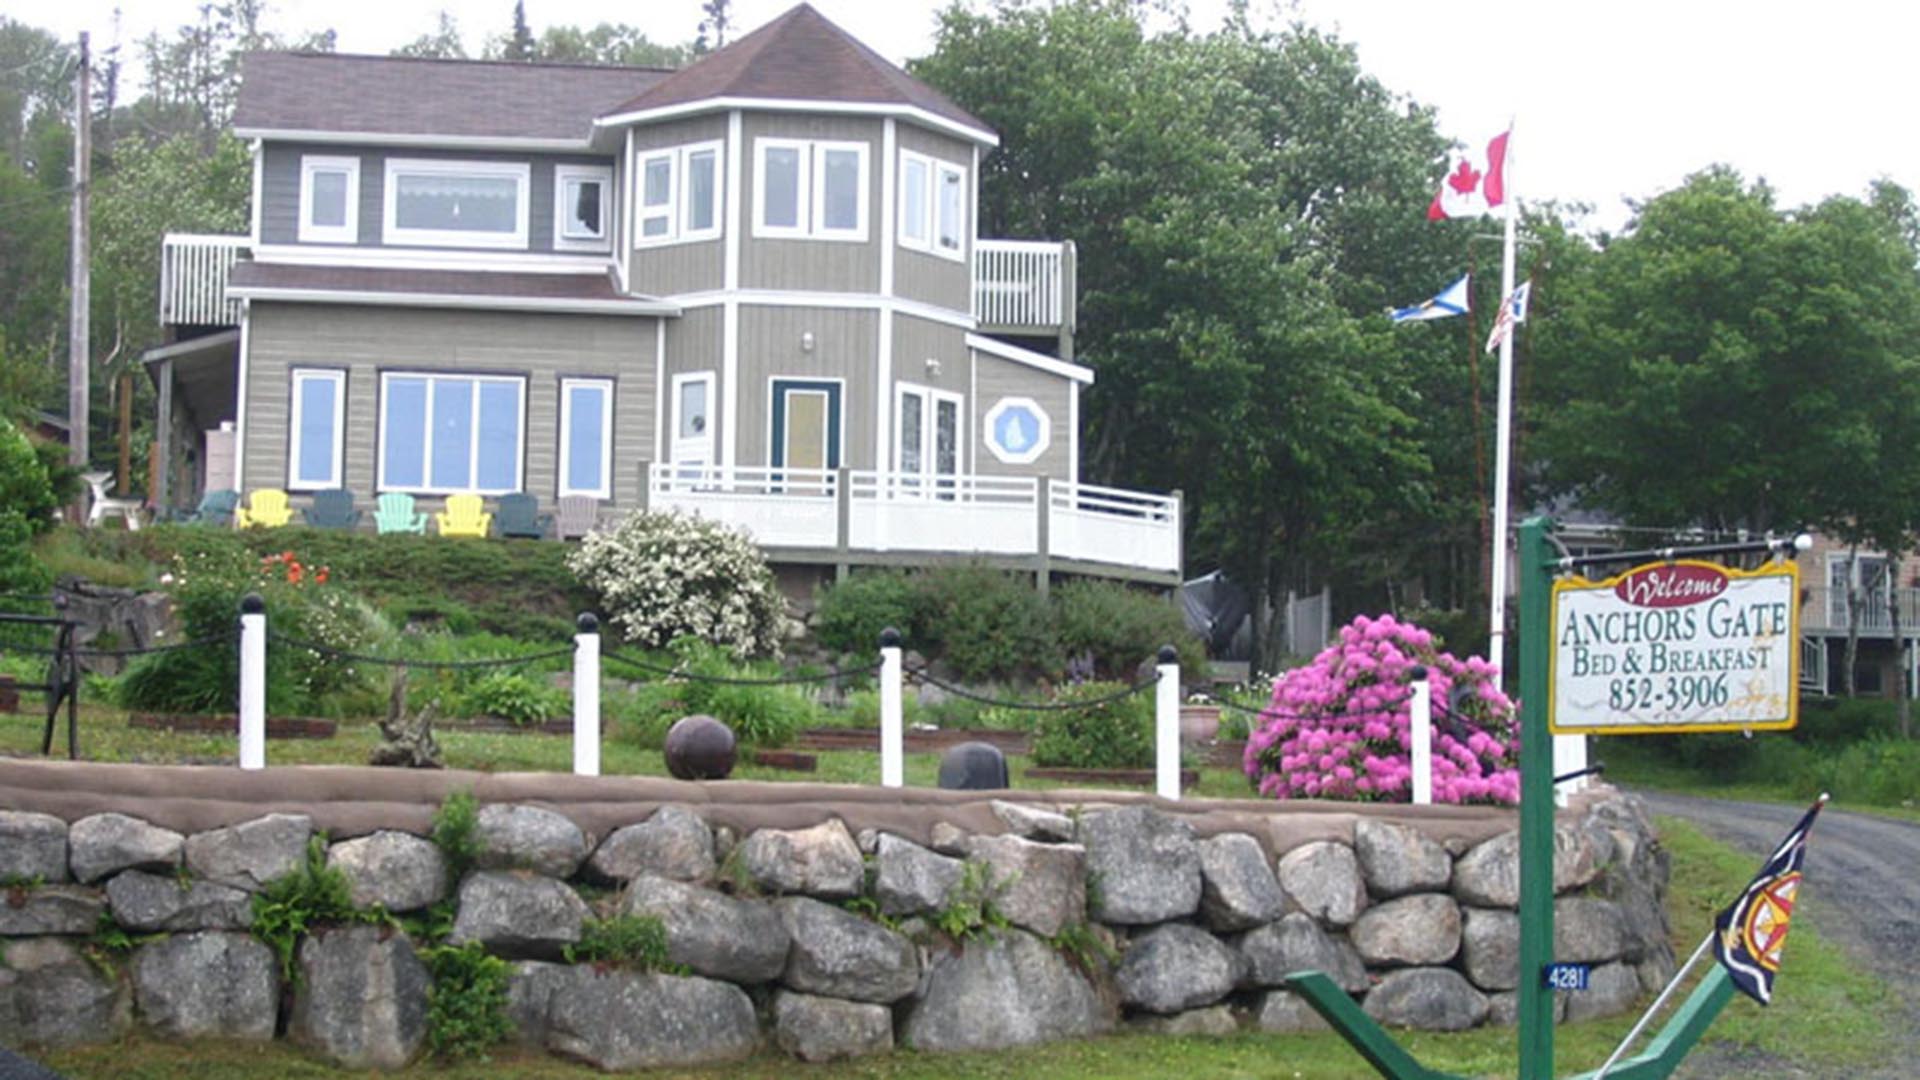 Anchors Gate Bed And Breakfast Tourism Nova Scotia Canada